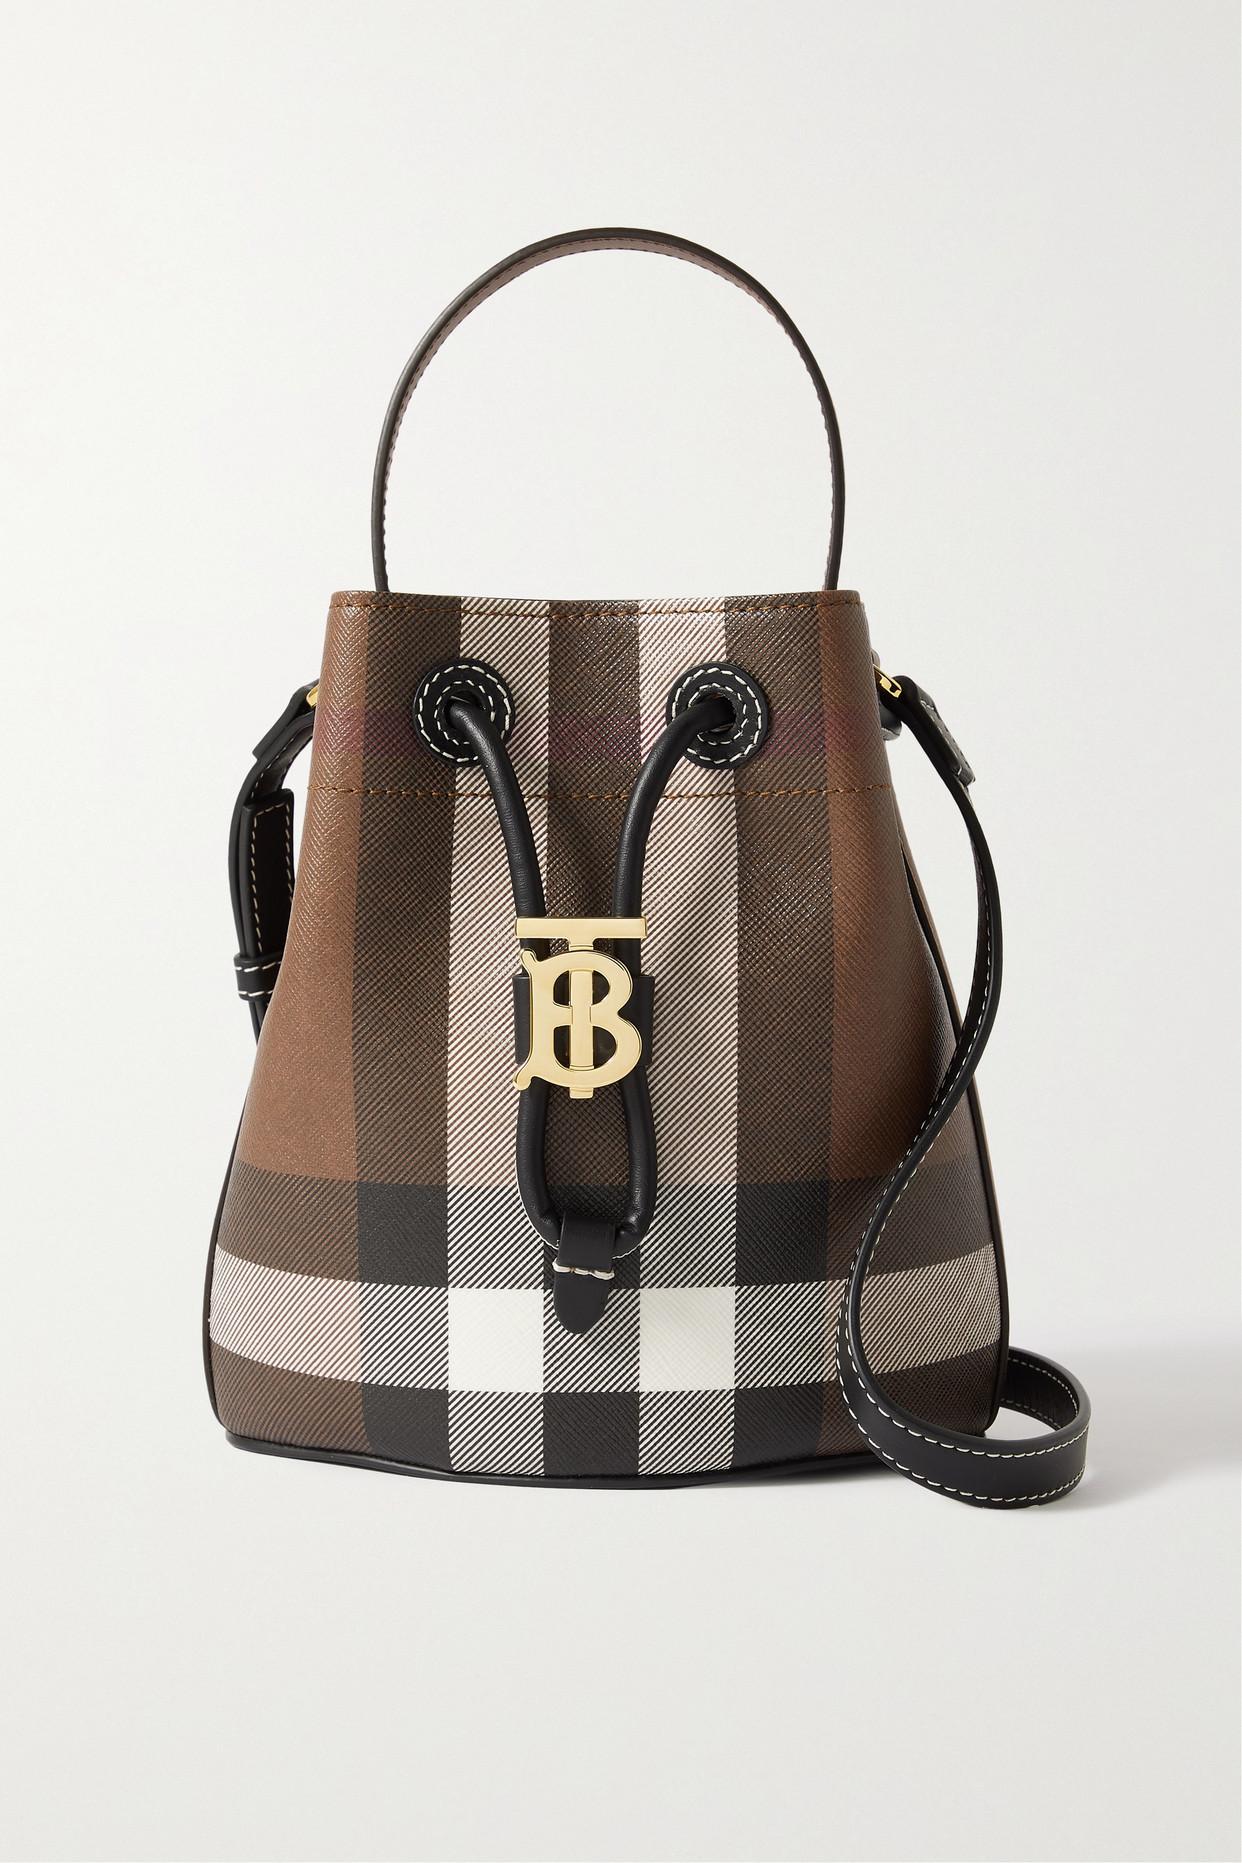 Burberry Bucket Beige Haymarket Check Coated Canvas and Leather Bucket Bag  Burberry